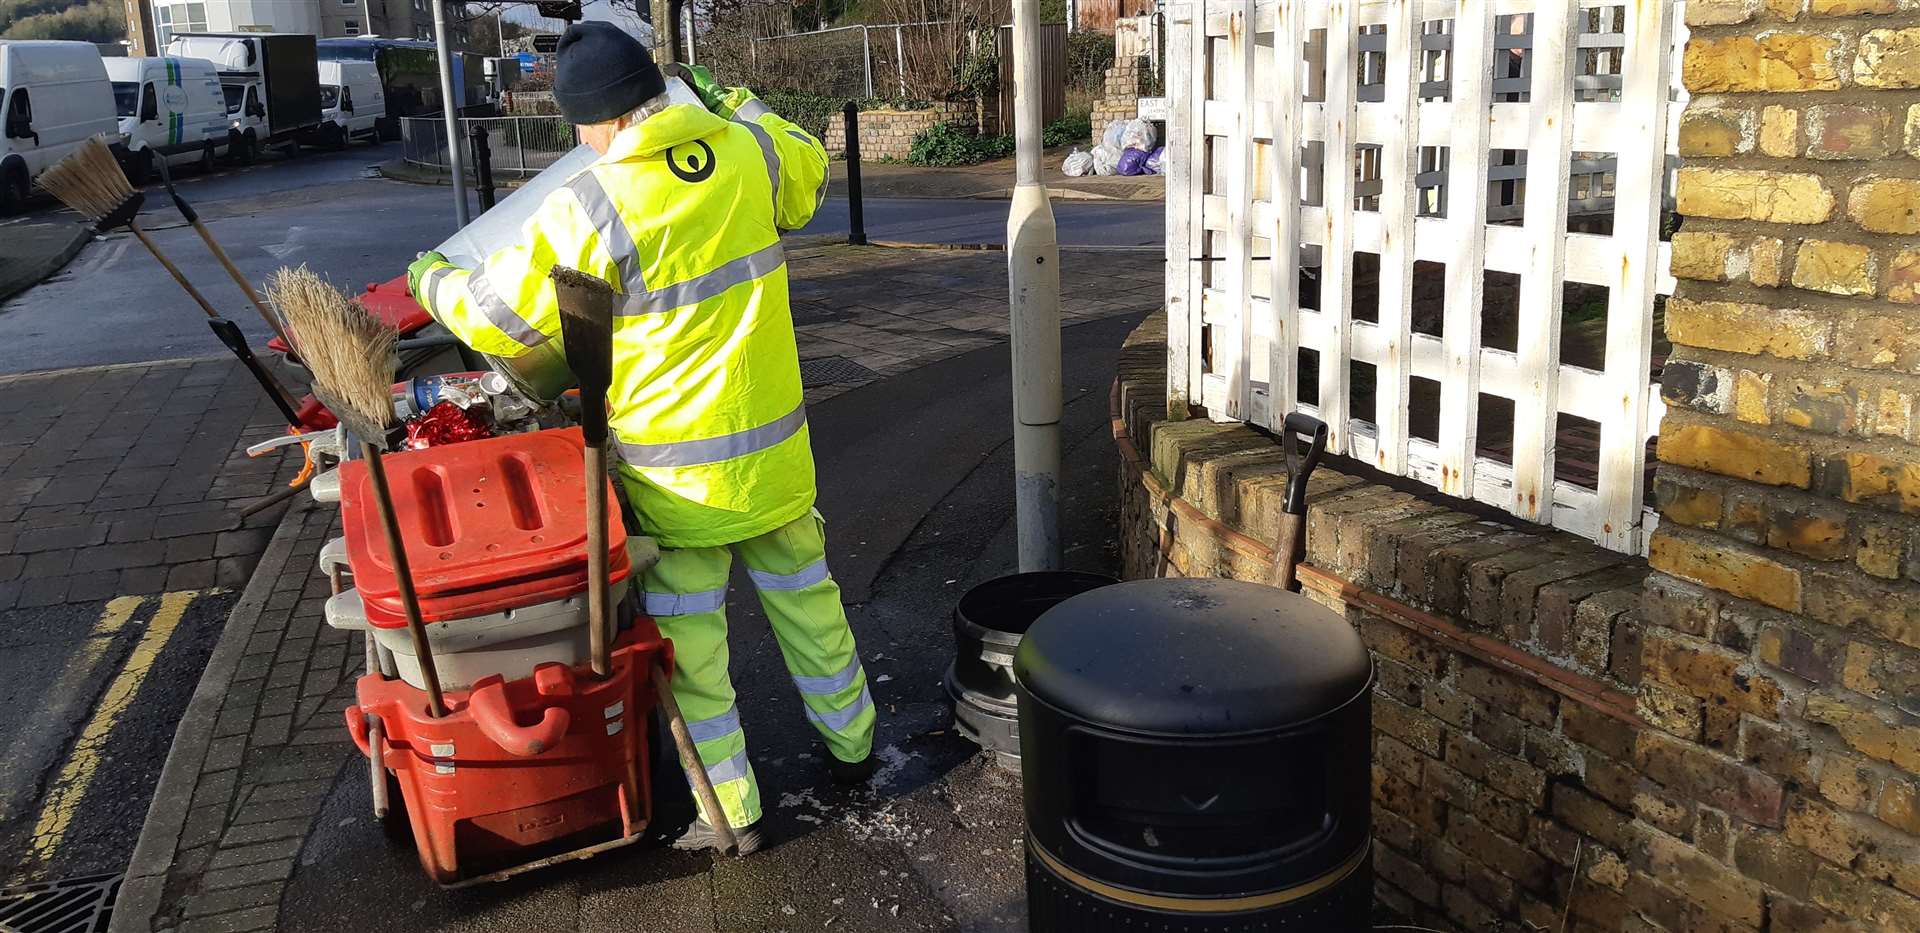 This street cleaner is emptying bins that had spilled over with food wrappers, cans and bottles from the drivers who spent three nights in queues